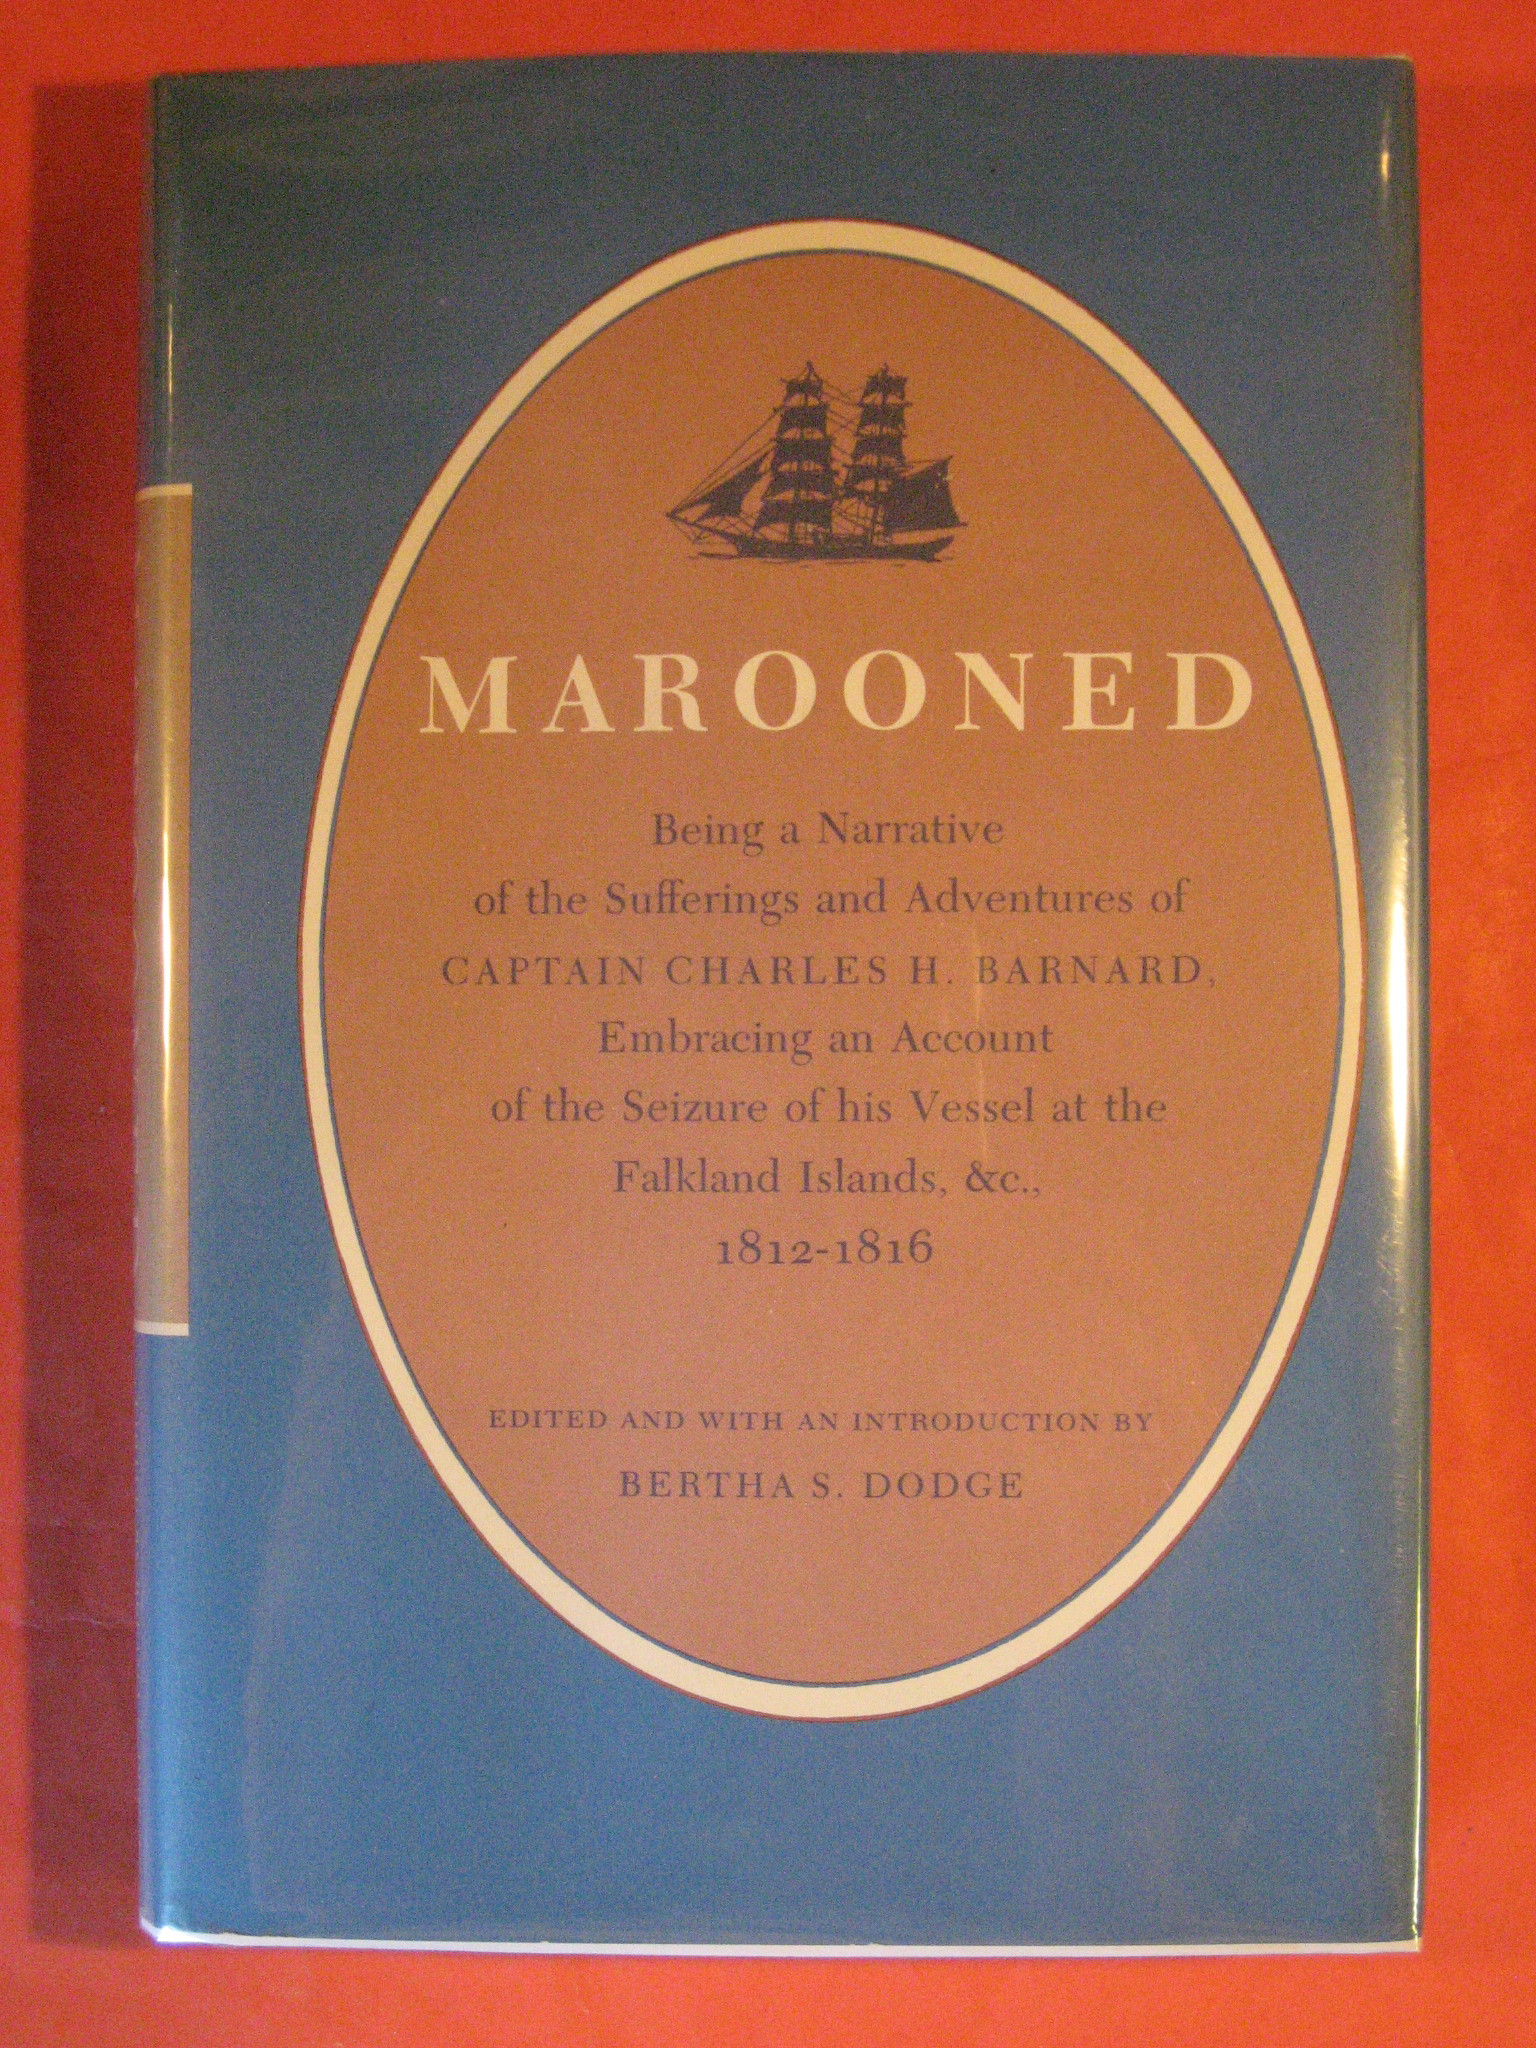 Image for Marooned: Being a Narrative of the Sufferings and Adventures of Captain Charles H. Barnard, Embracing an Account of the Seizure of his Vessel at the Falkland Islands, &c., 1812-1816